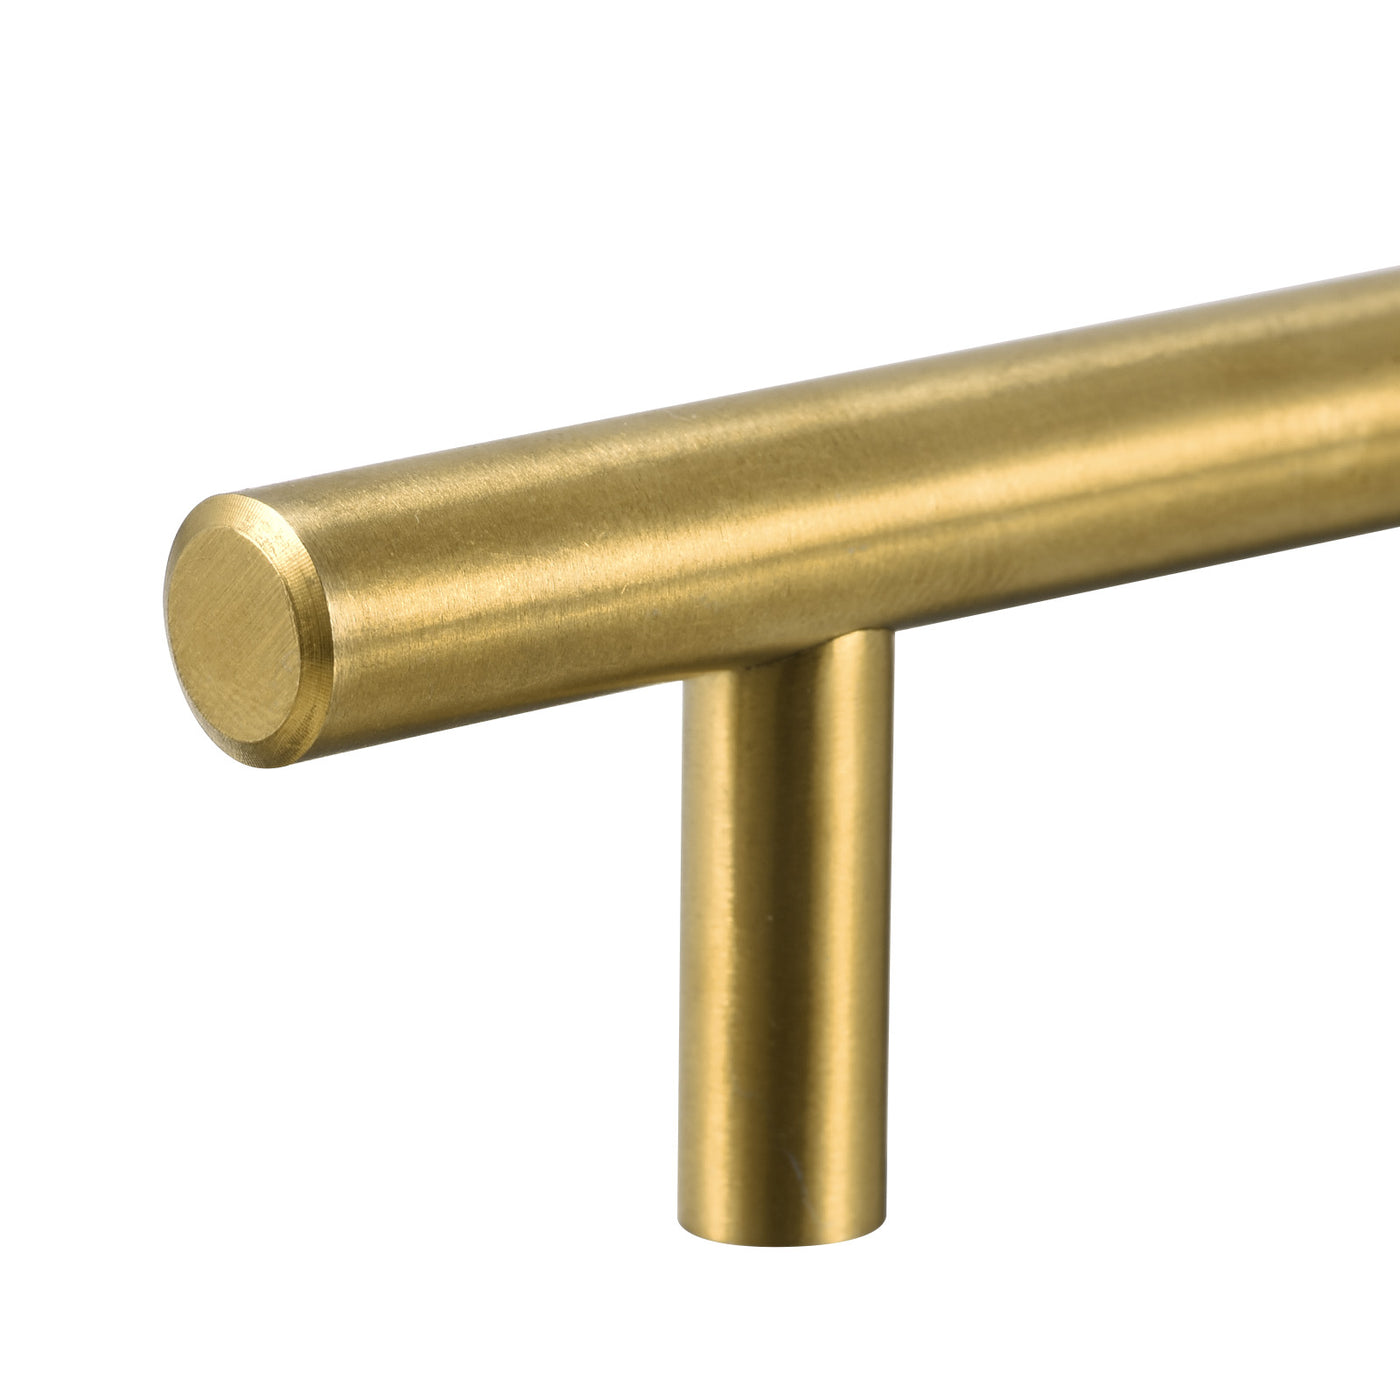 uxcell Uxcell T Bar Pull Handle, 8"(200mm) Length 10mm Dia Stainless Steel Cabinet Pulls 5"(128mm) Hole Center Distance Gold Tone 2pcs